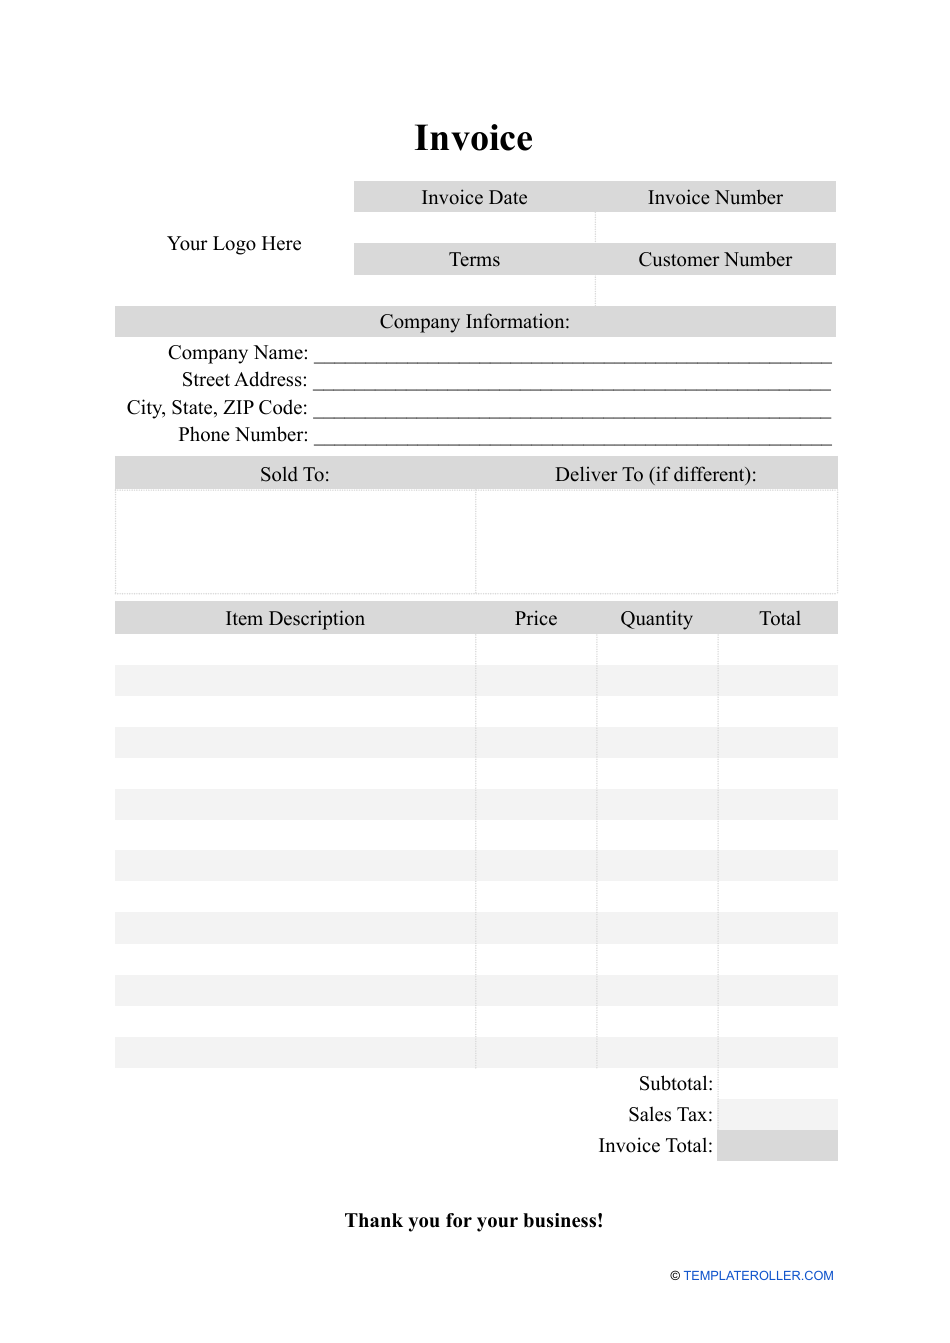 free blank invoice templates to download